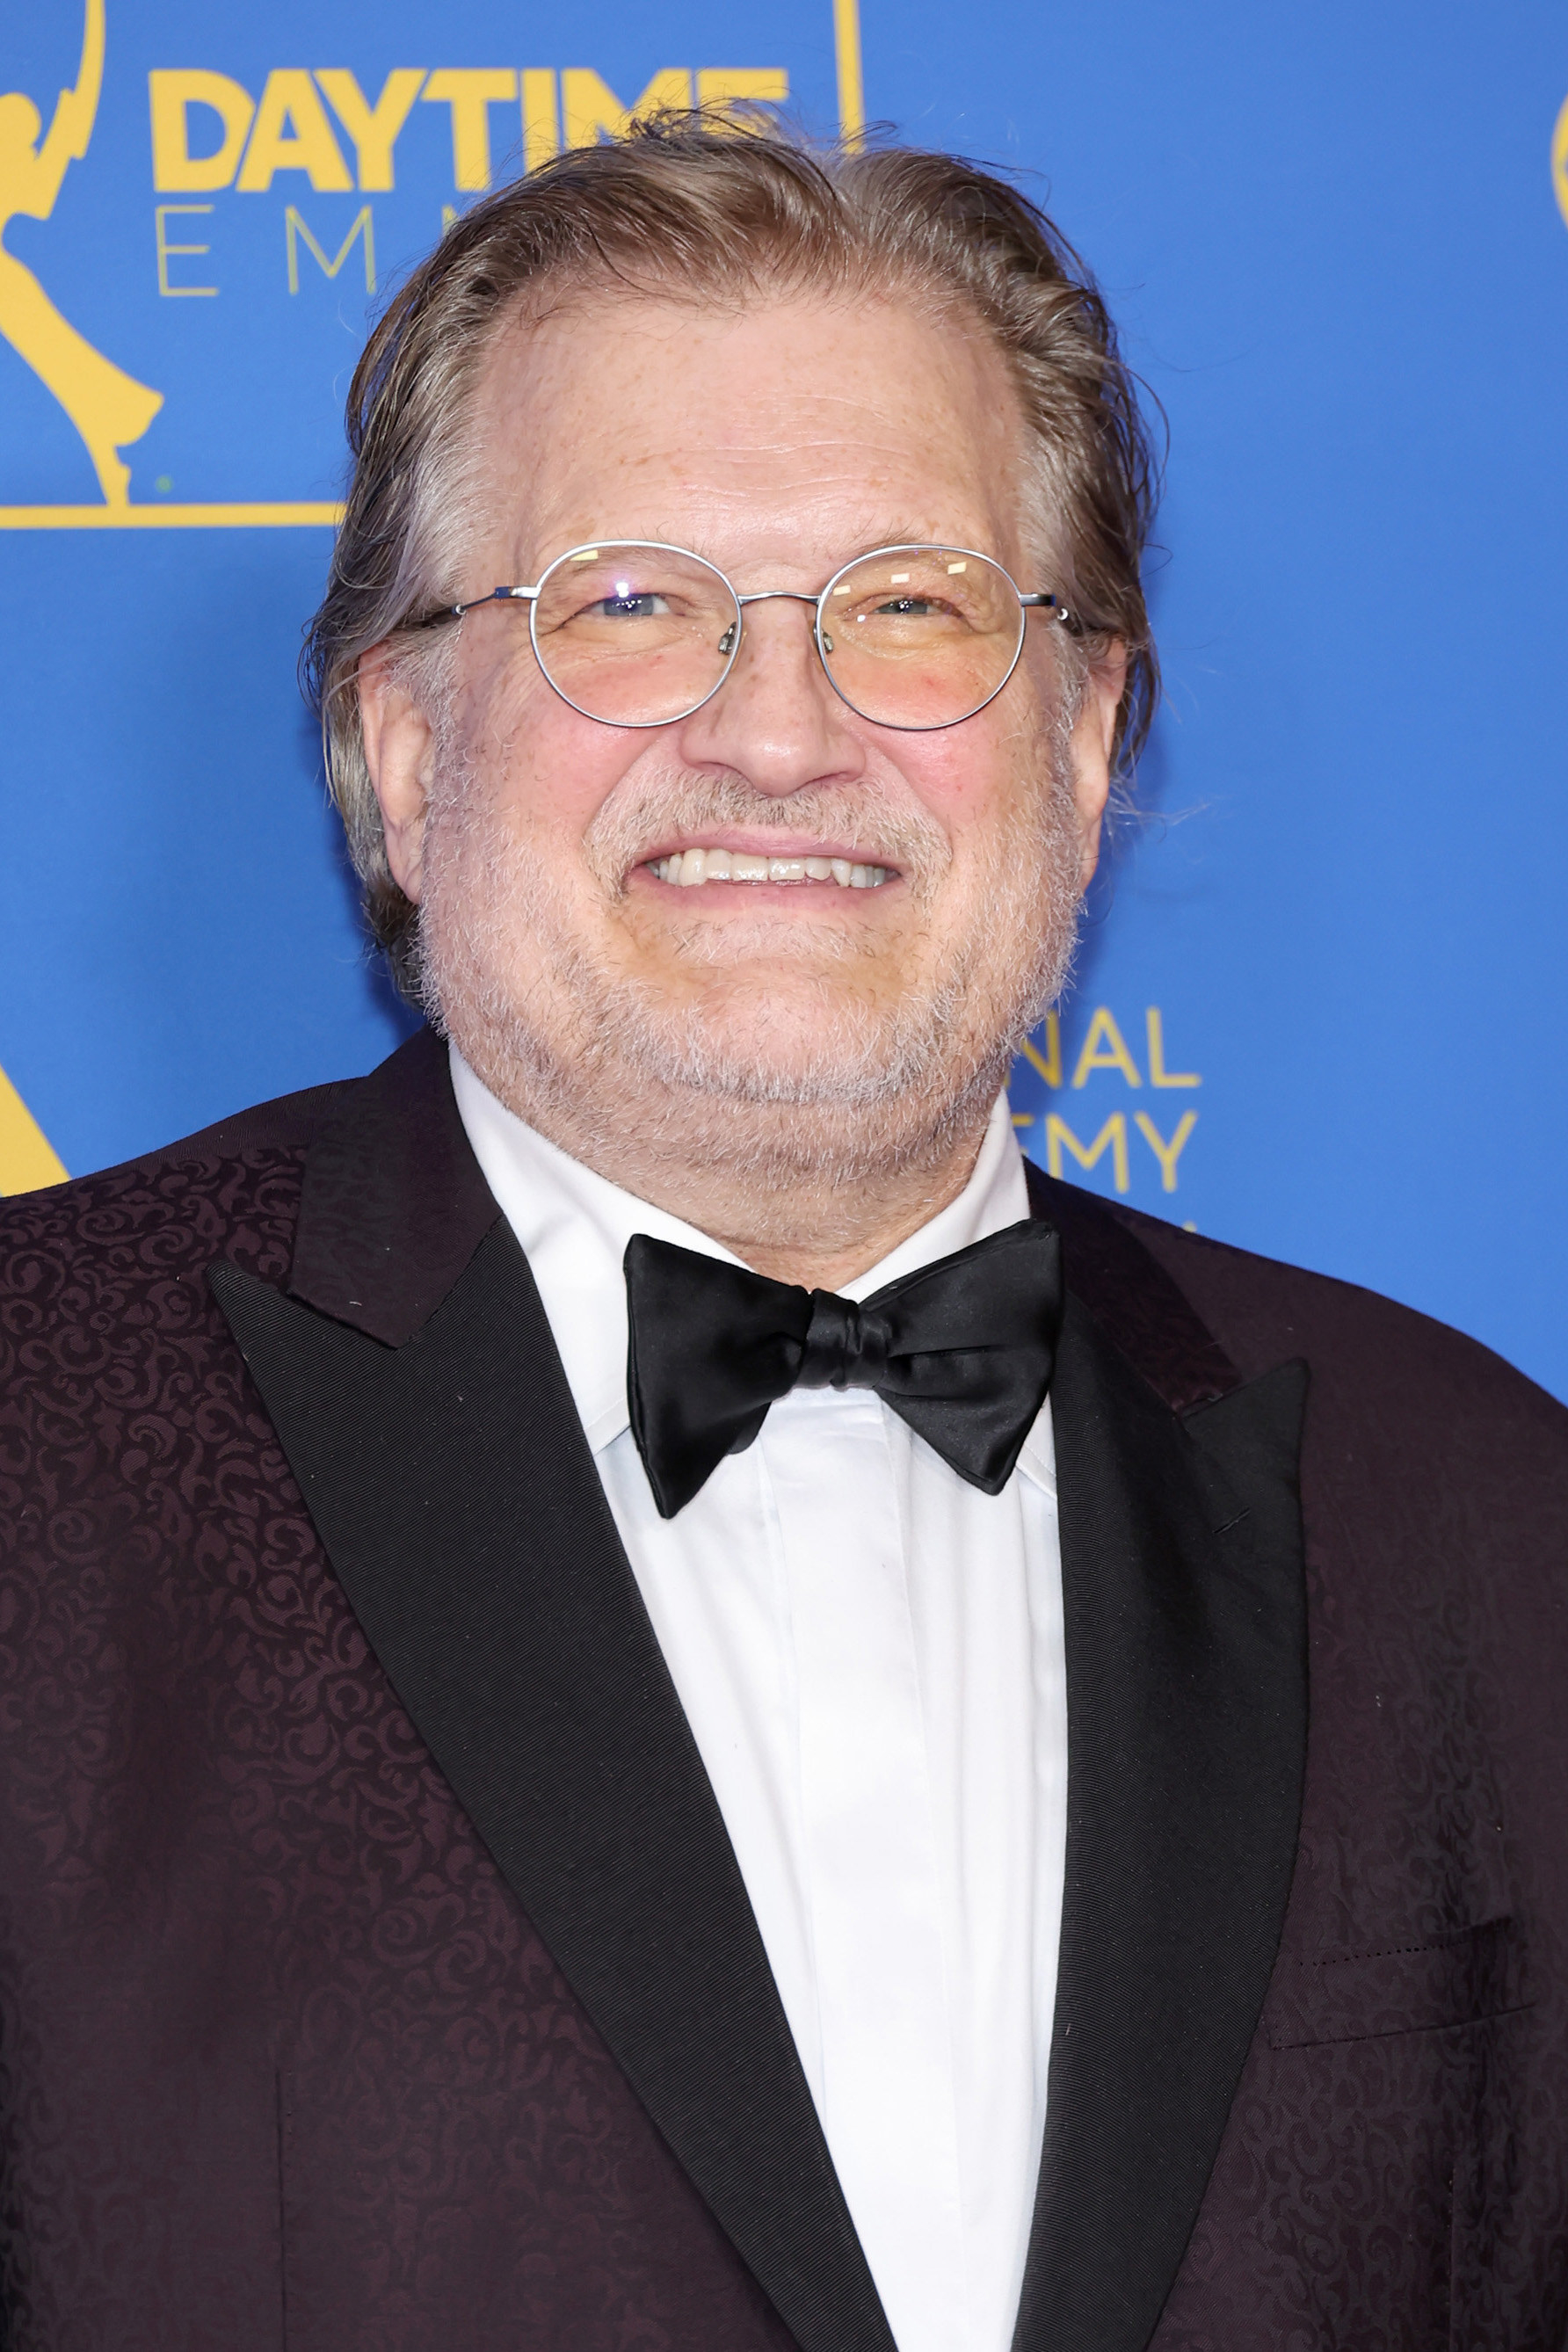 Drew Carey smiles at the Daytime Emmy Awards on June 24, 2022